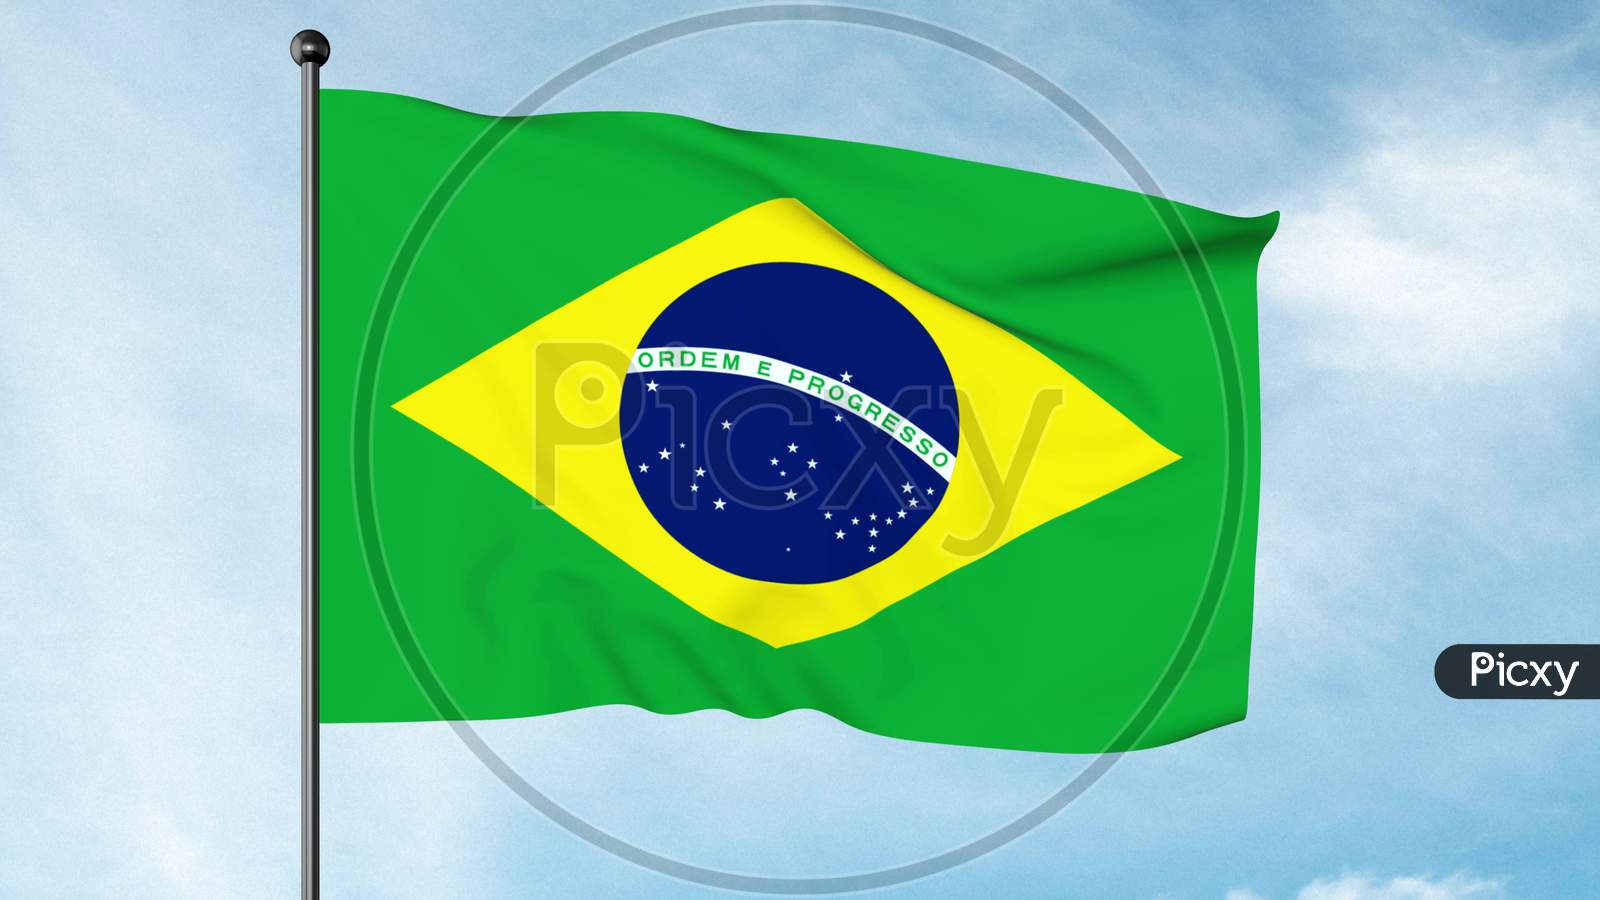 3D Illustration Of The Flag Of Brazil, Verde E Amarela, Auriverde, Is A Blue Disc Depicting A Starry Sky Inscribed With The National Motto "Ordem E Progresso", Within A Yellow Rhombus, On A Green Field